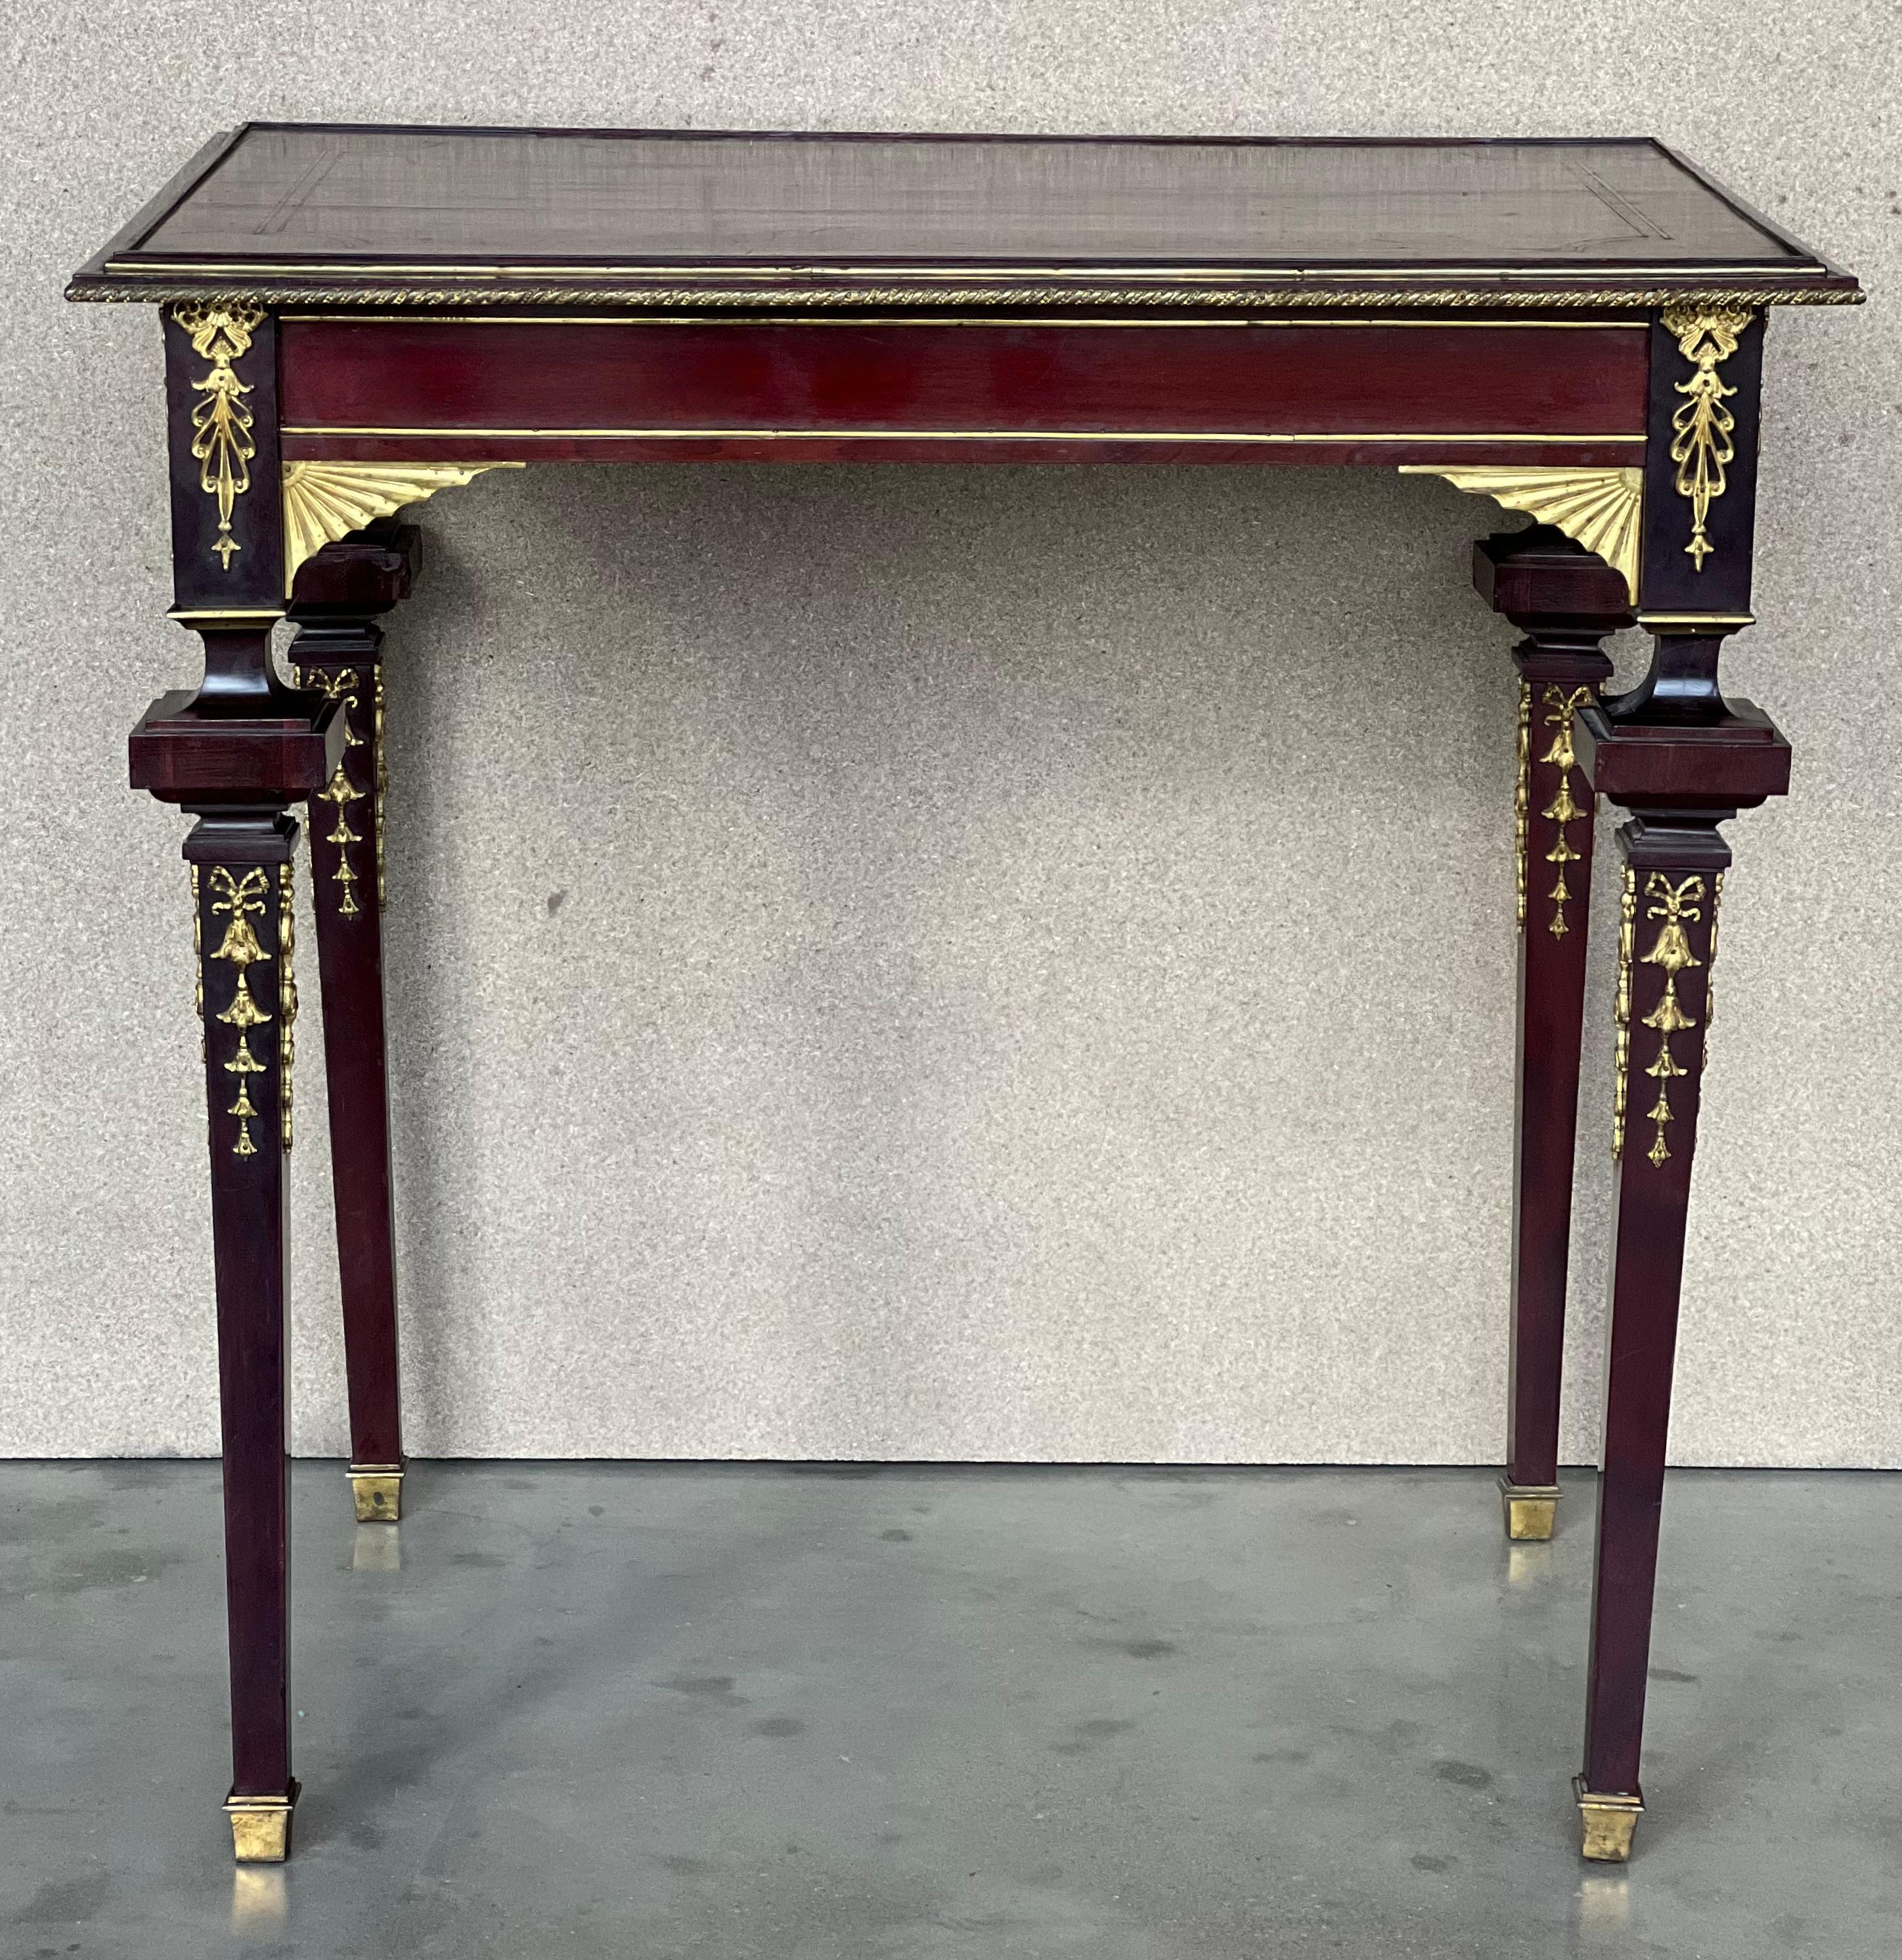 A very fine French 19th-20th century Louis XVI style mahogany and gilt bronze (Ormolu) mounted guéridon side table in style to François Linke, (1855-1946). The beleveled top has a fine inlay, the apron with finely chased cast ormolu mounts in